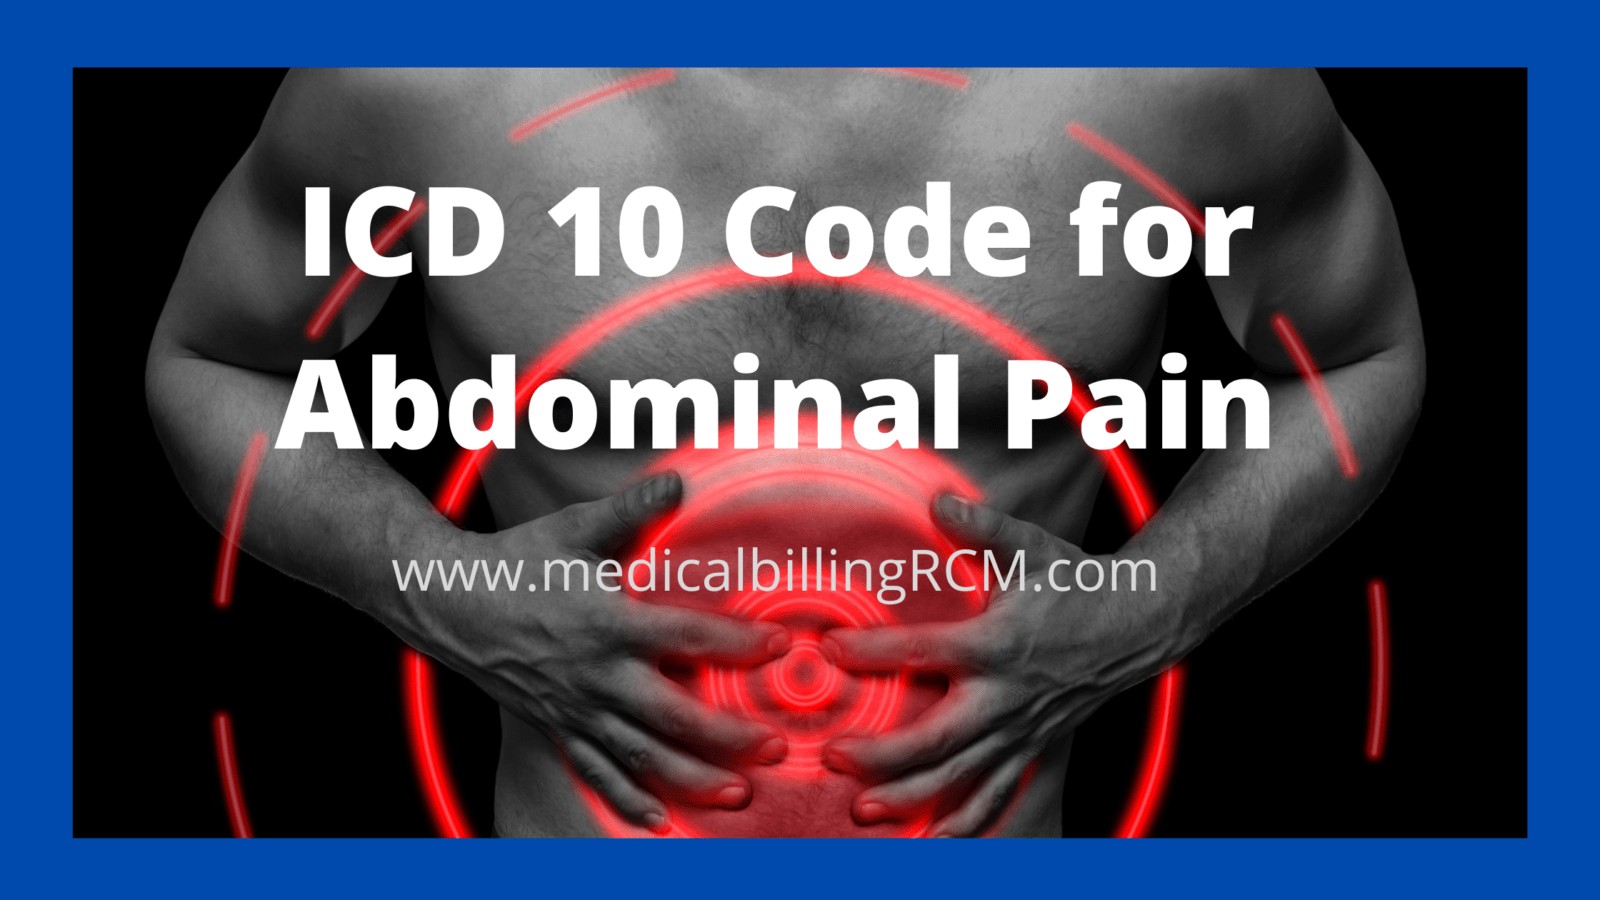 ICD 10 Code for Abdominal Pain